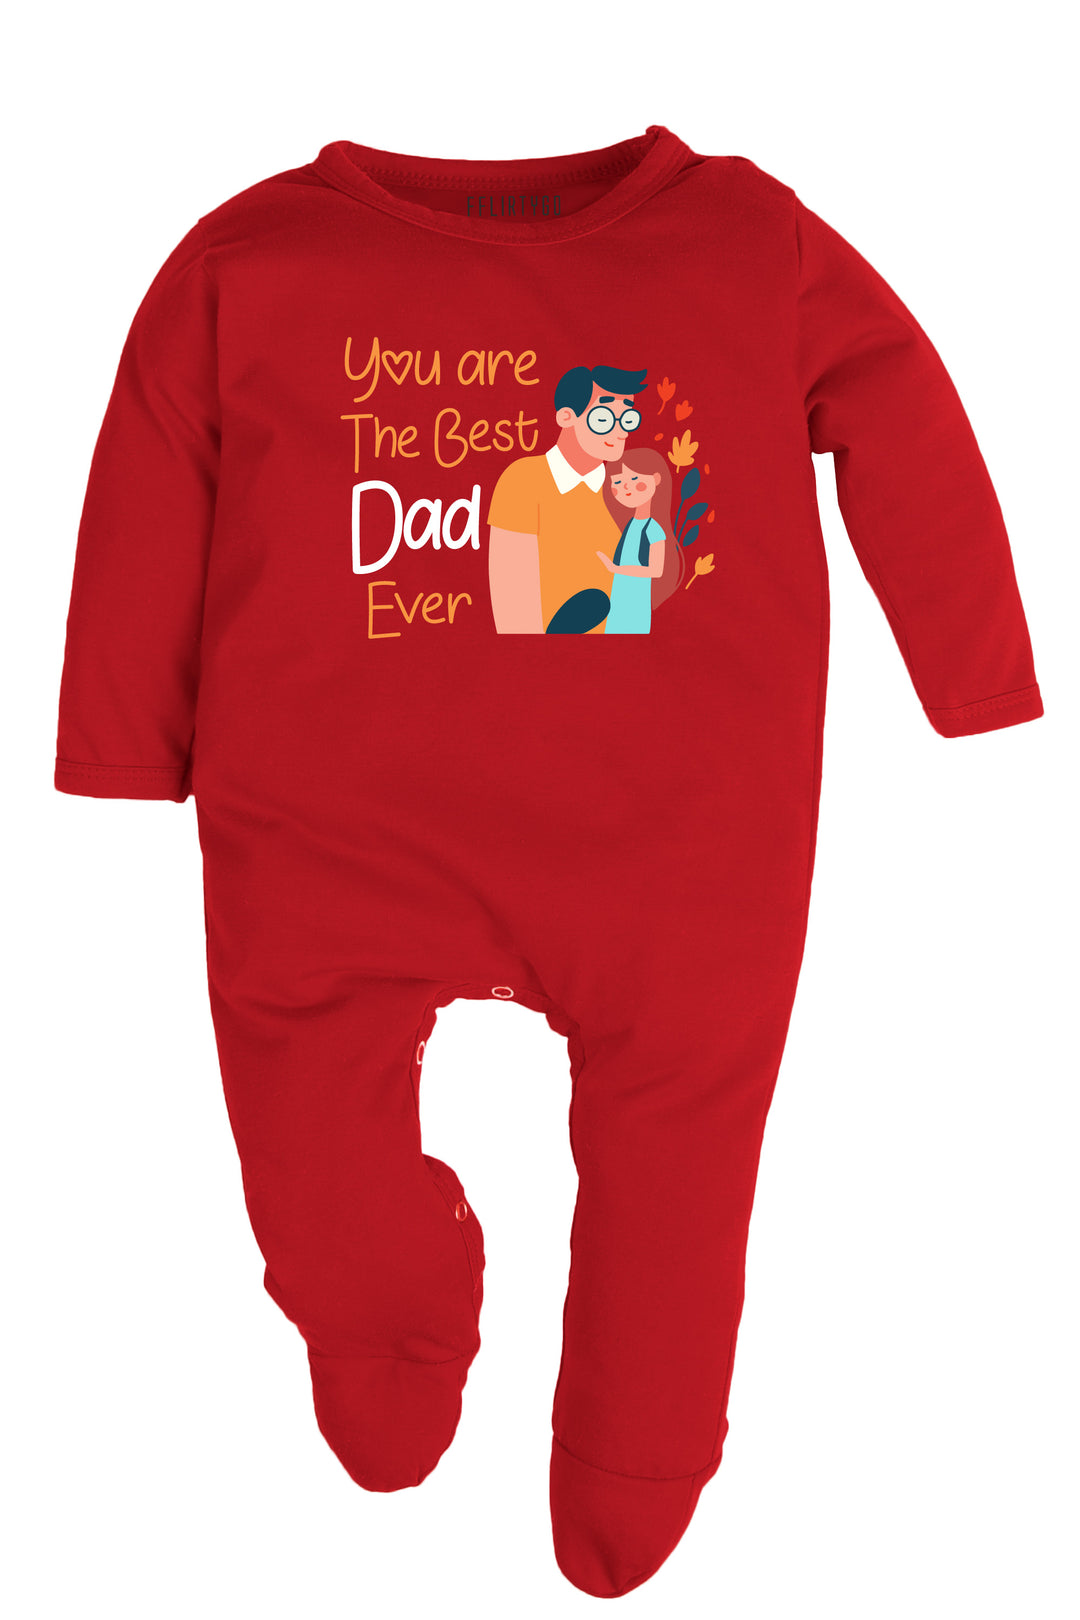 You Are the Best Dad Ever (Girl) Baby Romper | Onesies